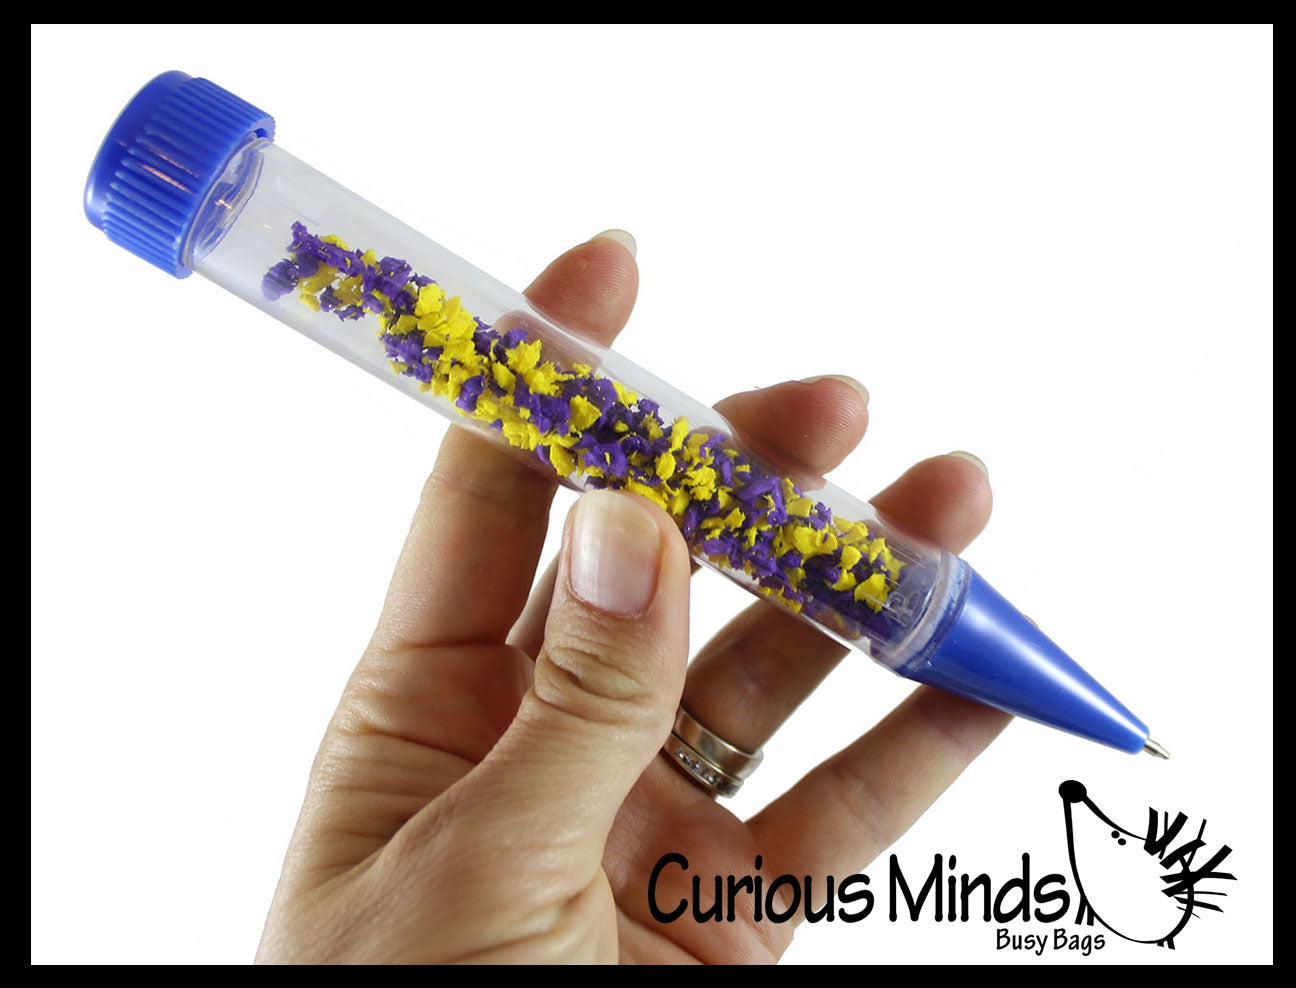 LAST CHANCE - LIMITED STOCK - Bundle of Fun Pens with Different Compou